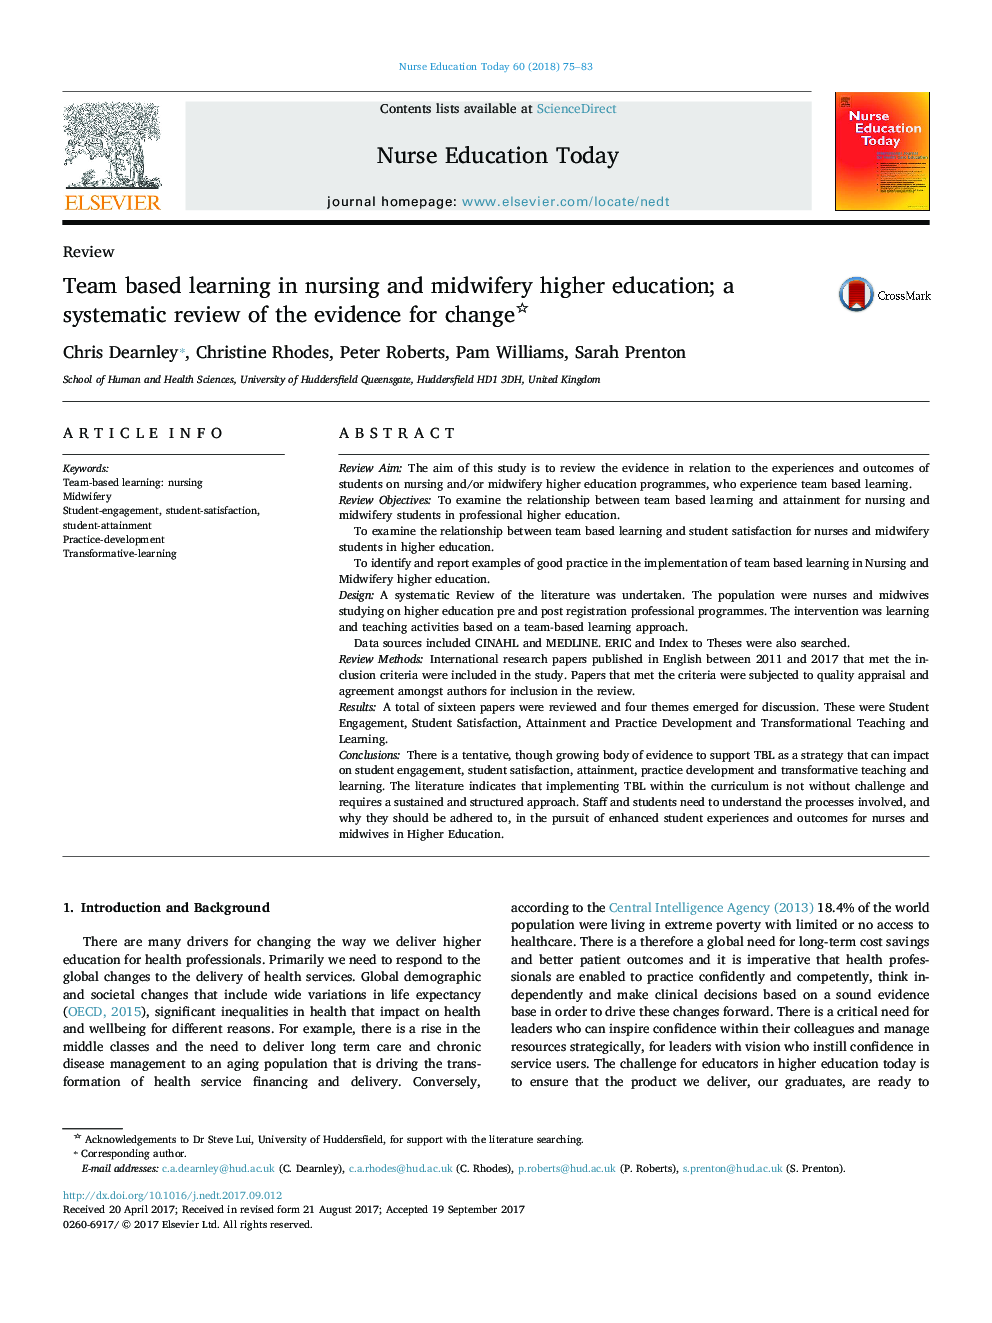 Team based learning in nursing and midwifery higher education; a systematic review of the evidence for change